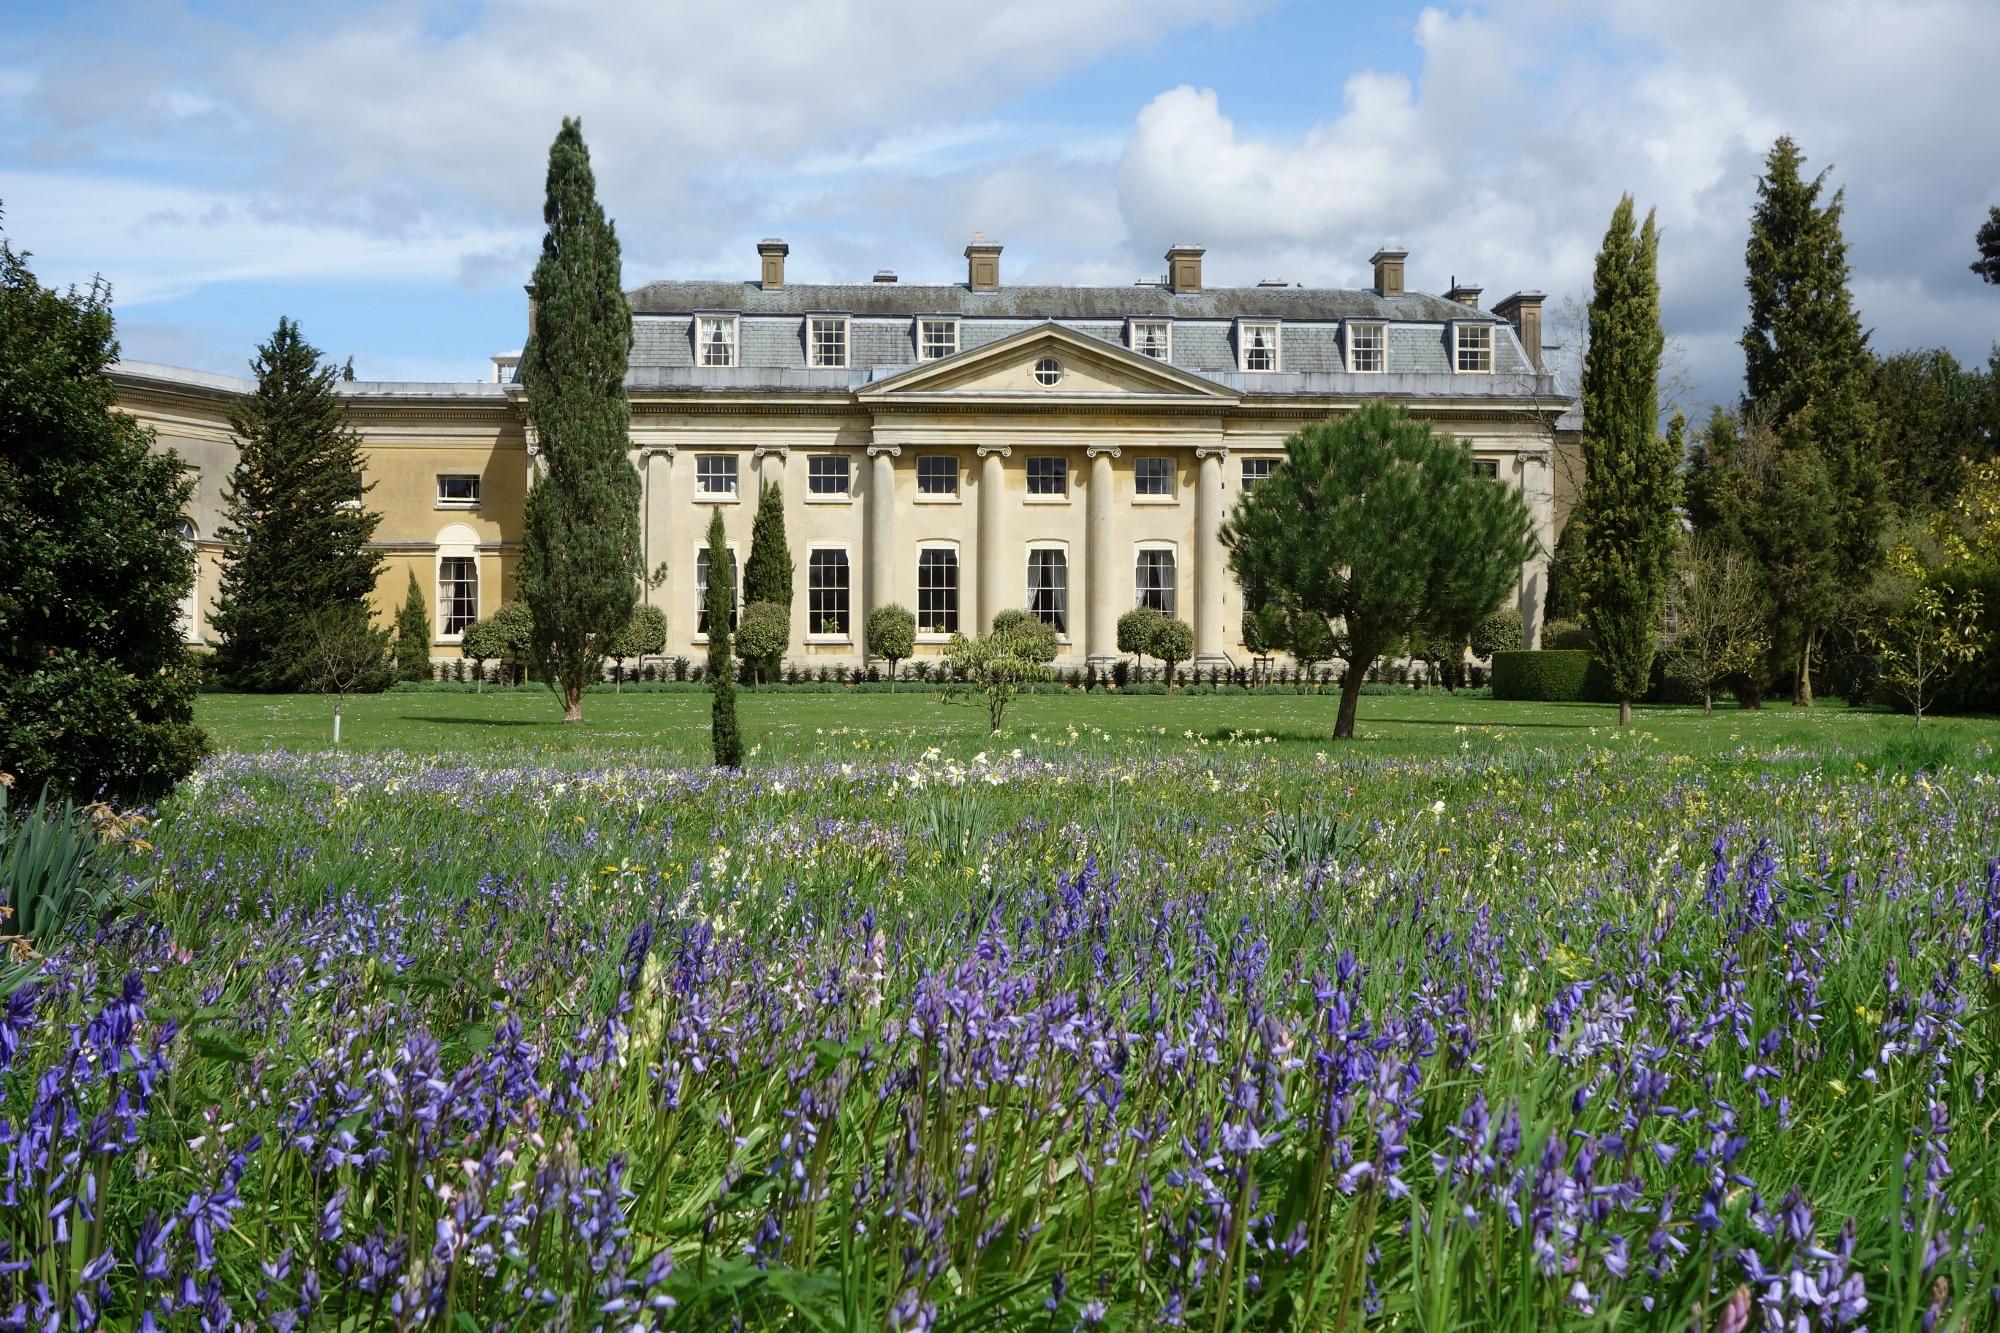 The east wing of Ickworth House - now a hotel